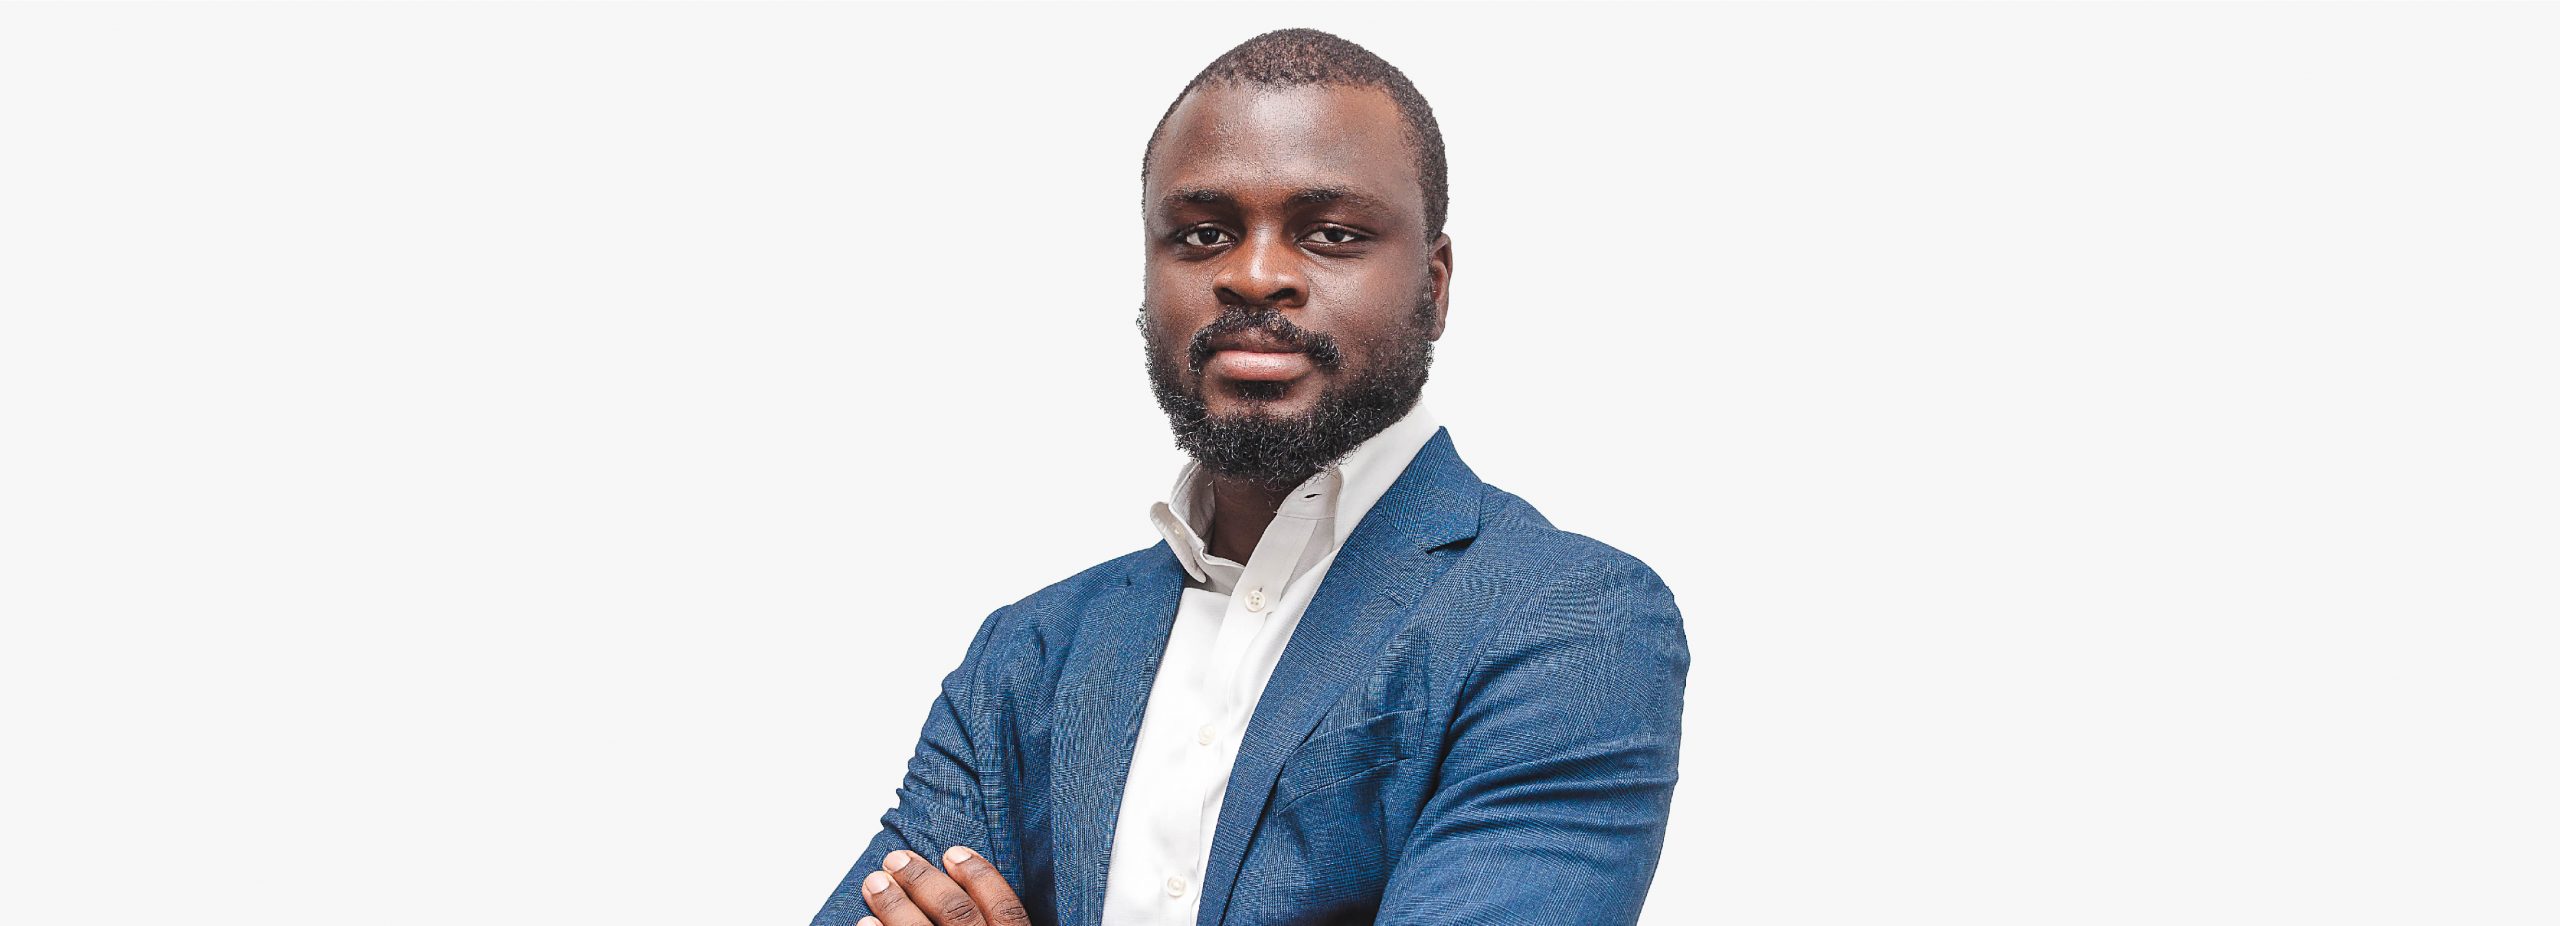 Joel Ogunsola, Microsoft Alumnus and CEO Prunedge accepted into Forbes Technology Council